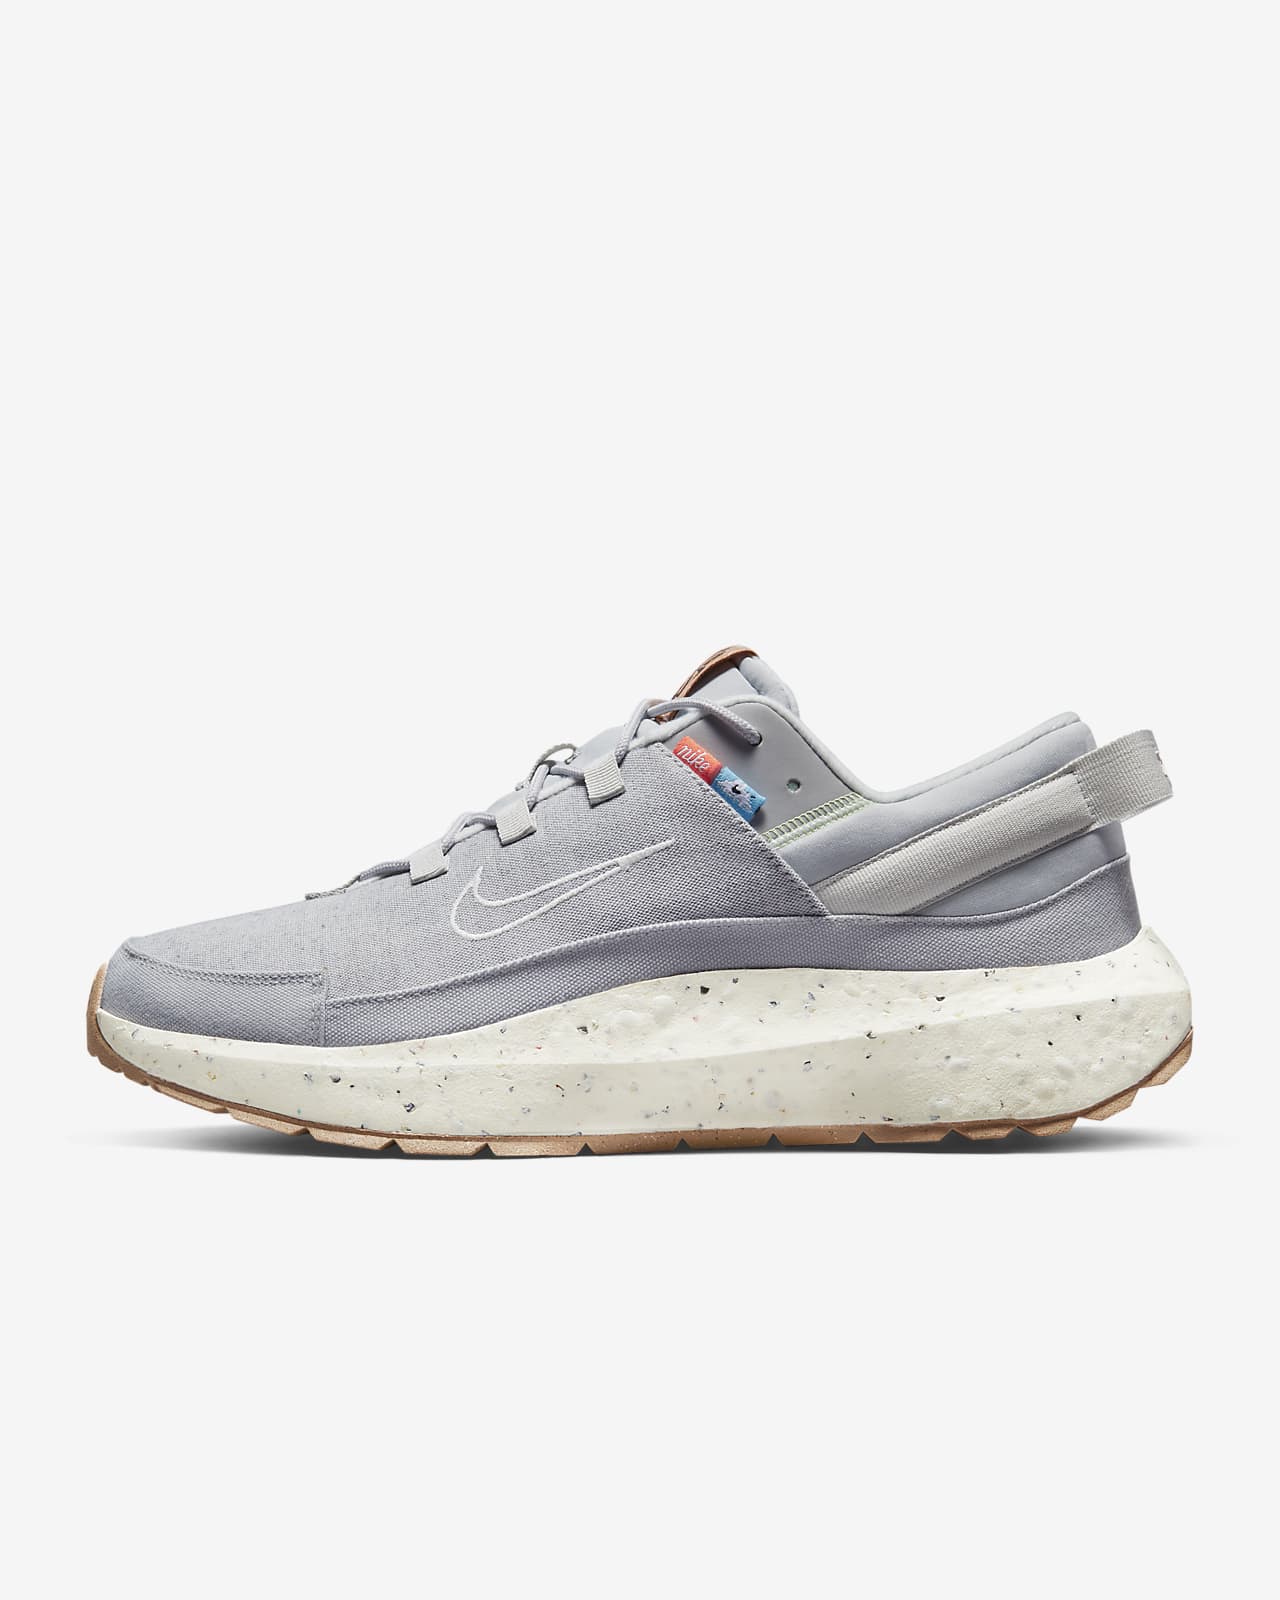 Chaussure Nike Crater Remixa pour Homme